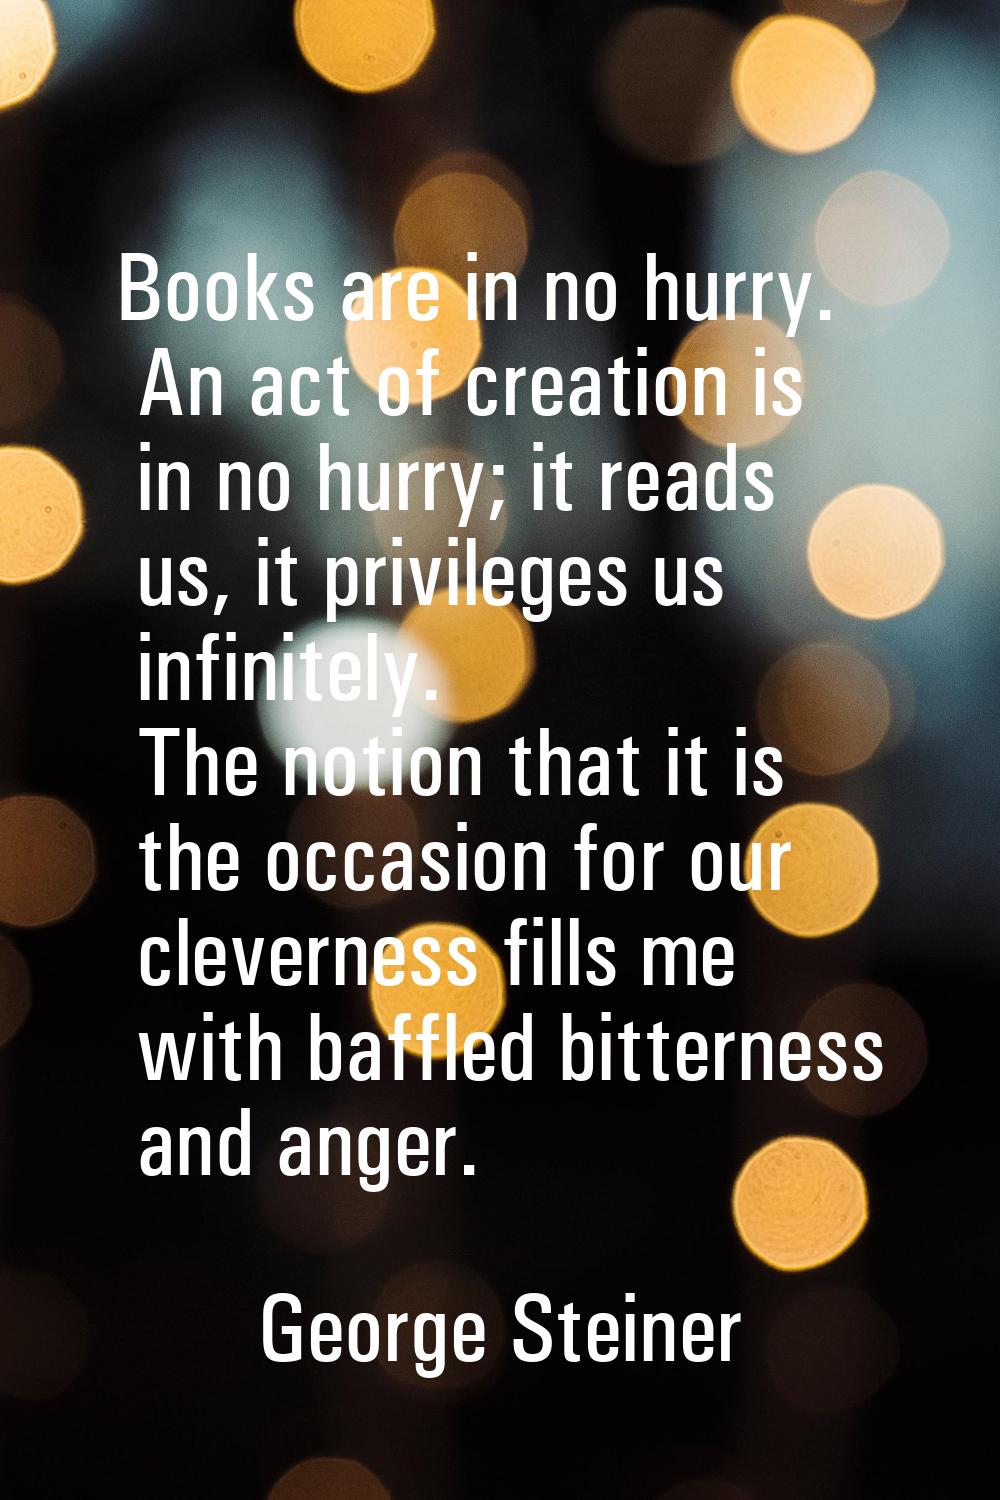 Books are in no hurry. An act of creation is in no hurry; it reads us, it privileges us infinitely.